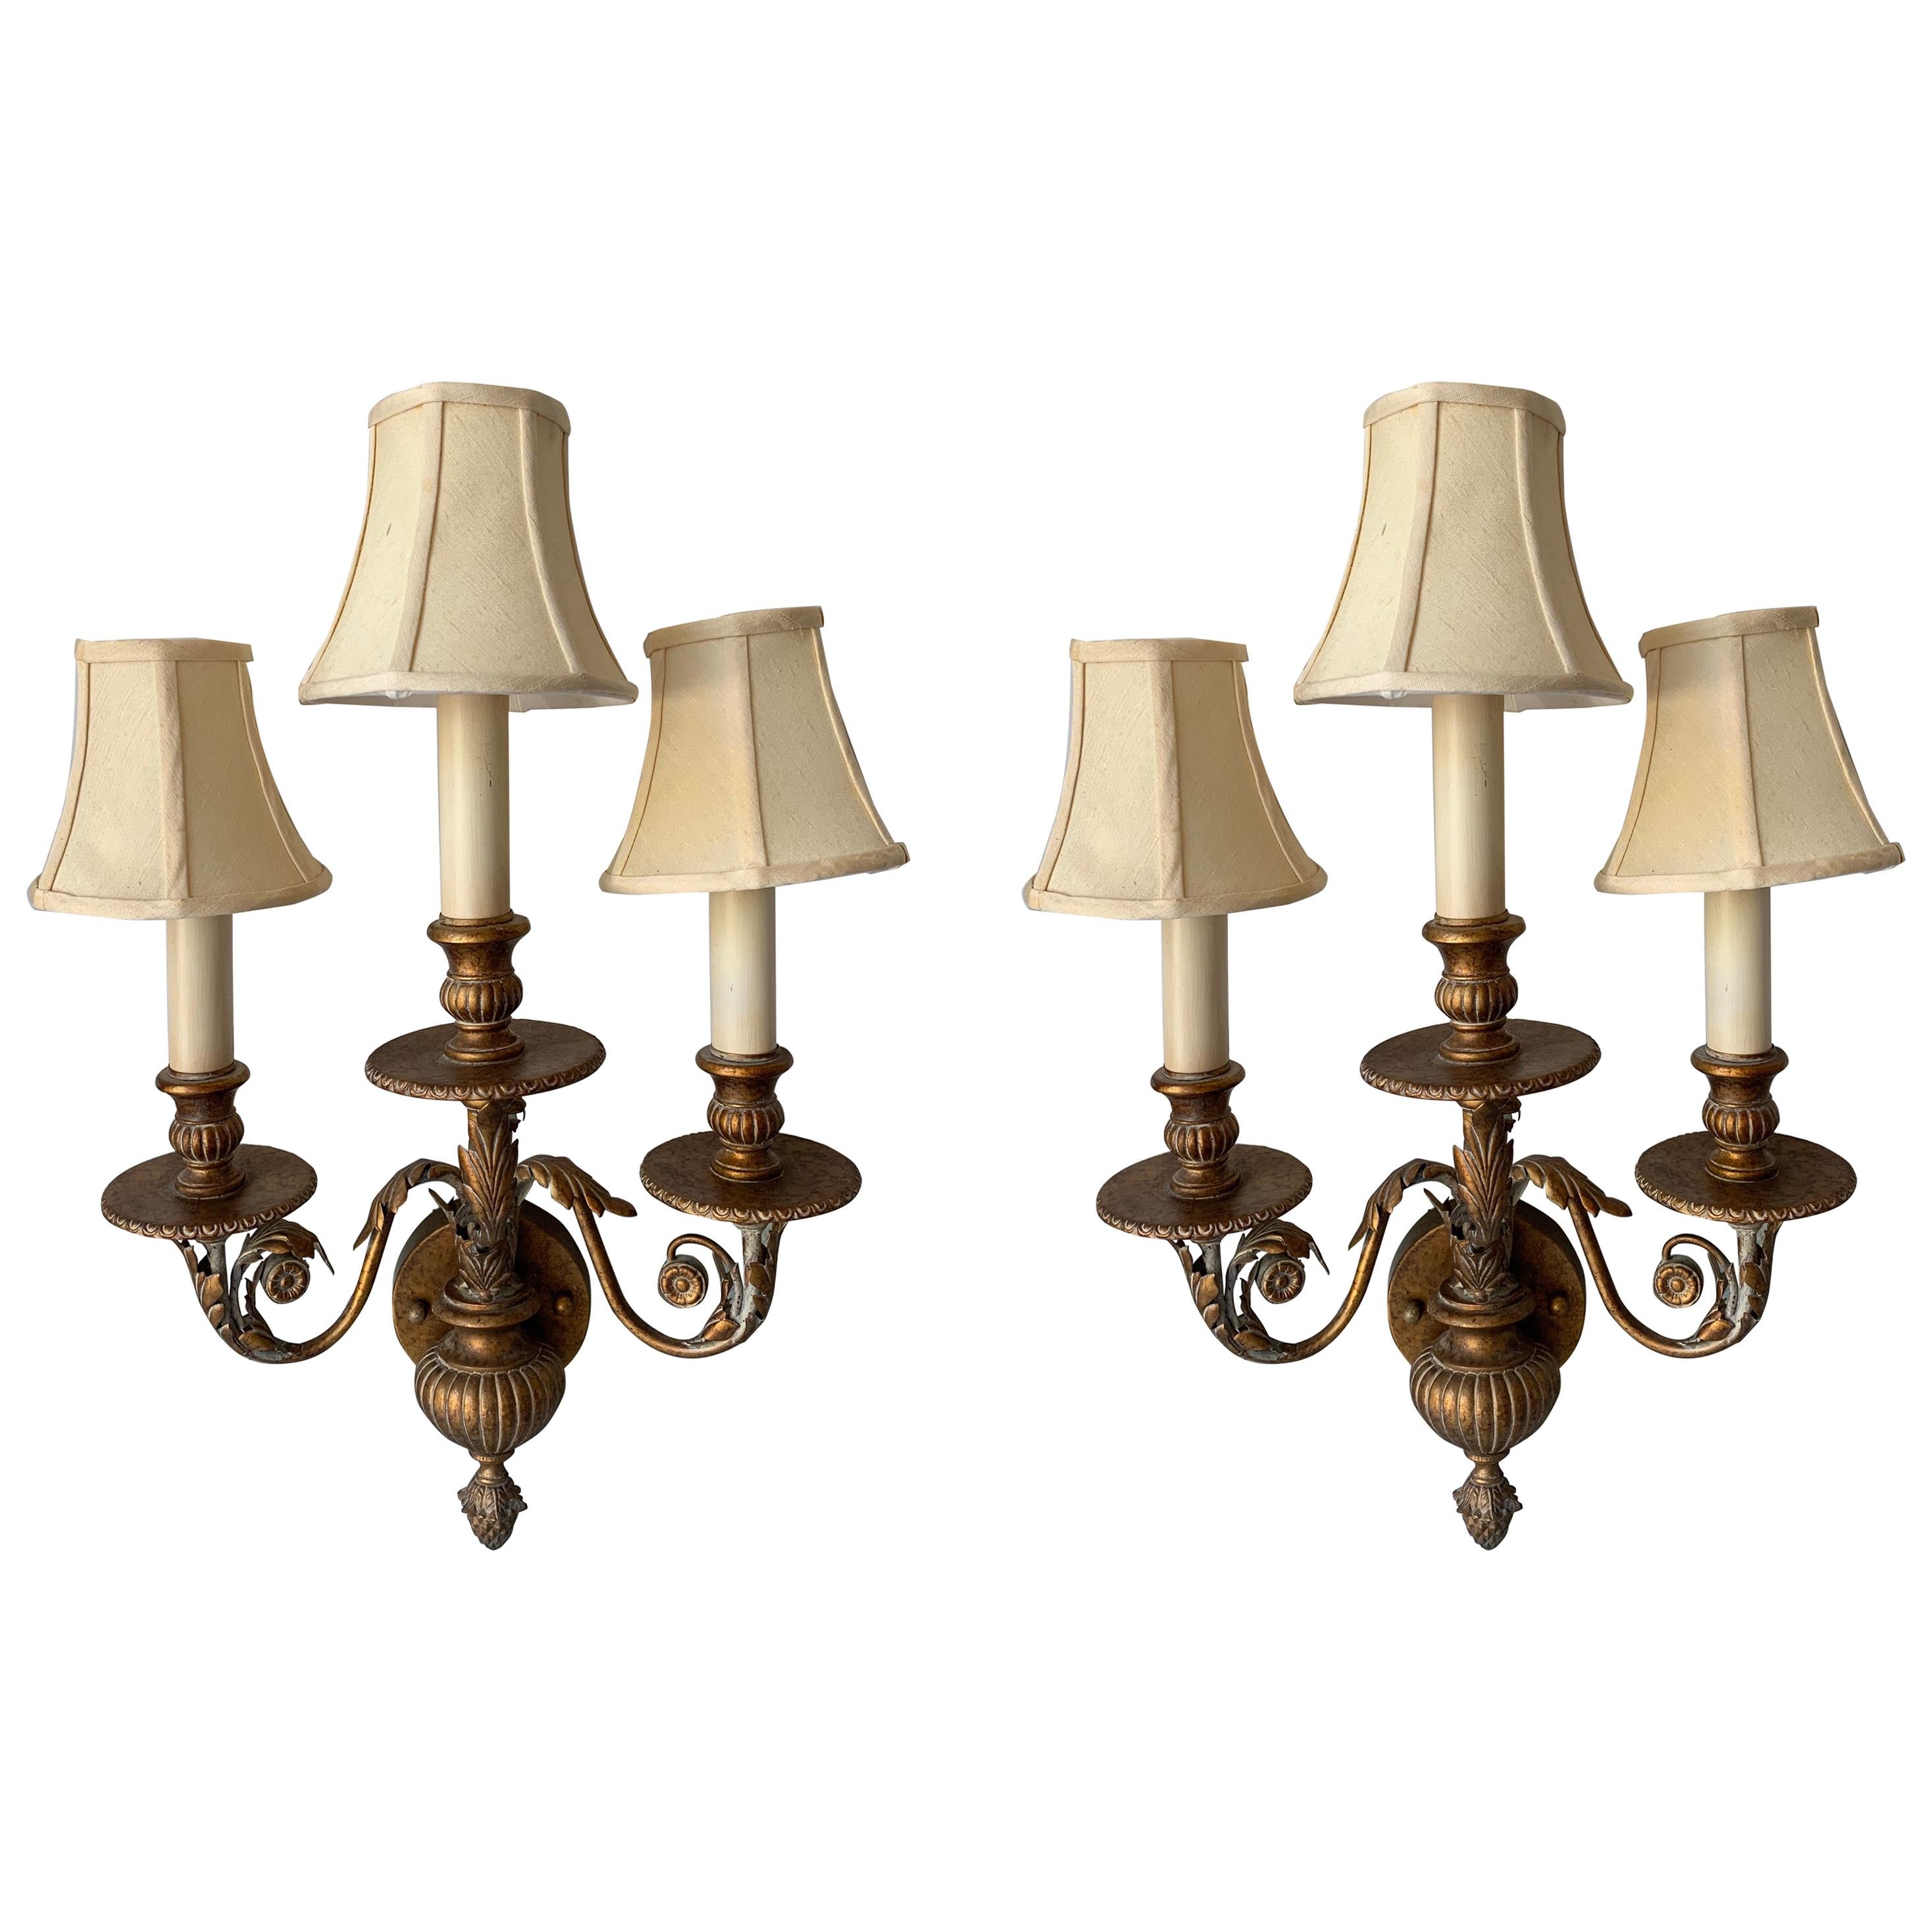 Traditional 3-Arm Brass Sconces & Shades by the Fine Arts Company, a Pair For Sale